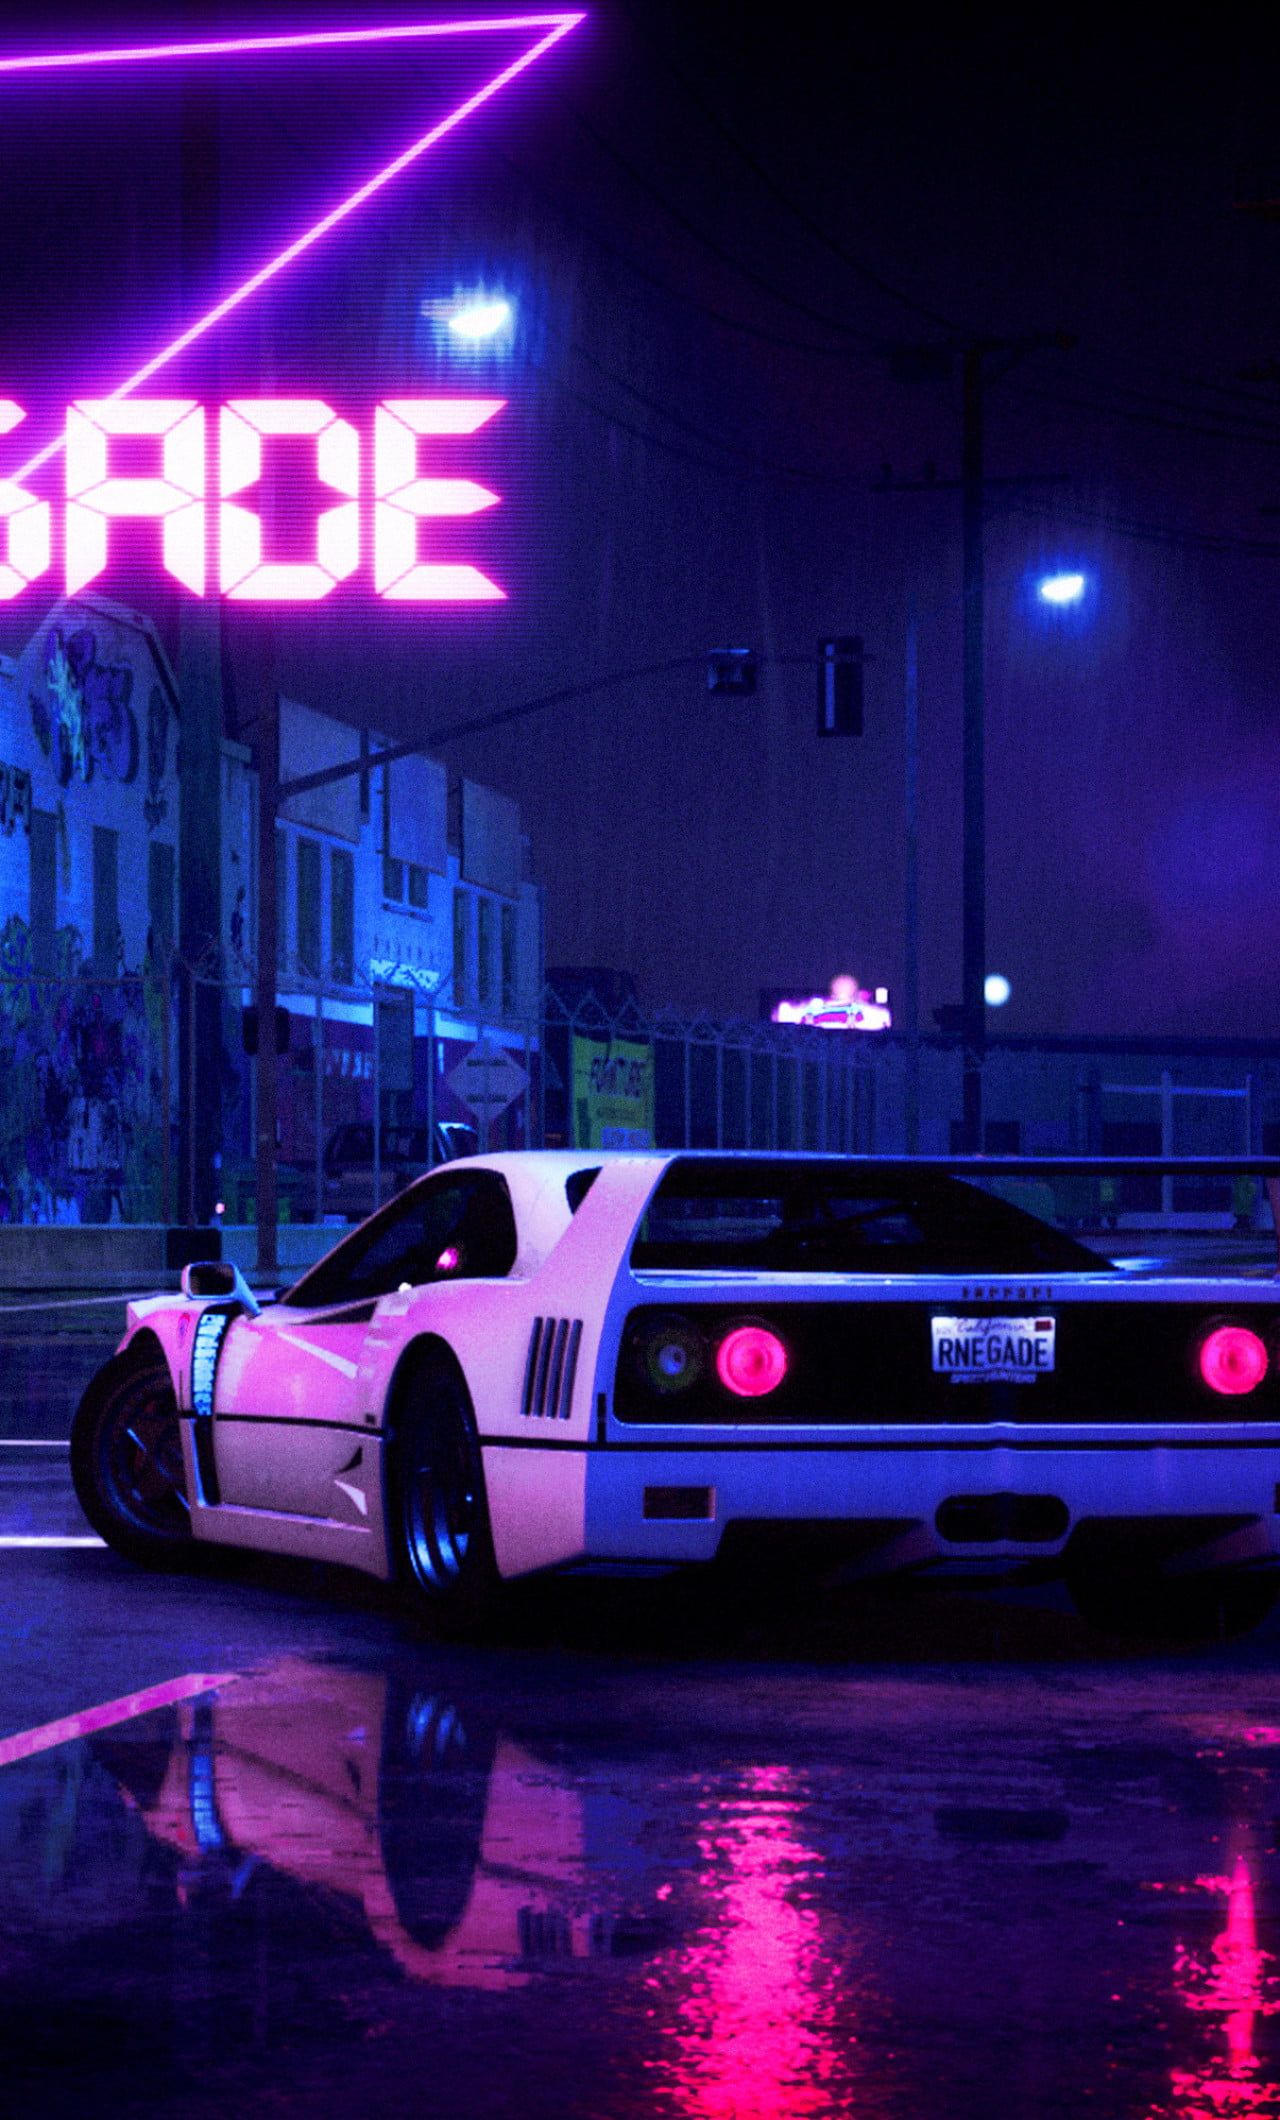 Wallpaper of a white sports car in a neon lit street - Synthwave